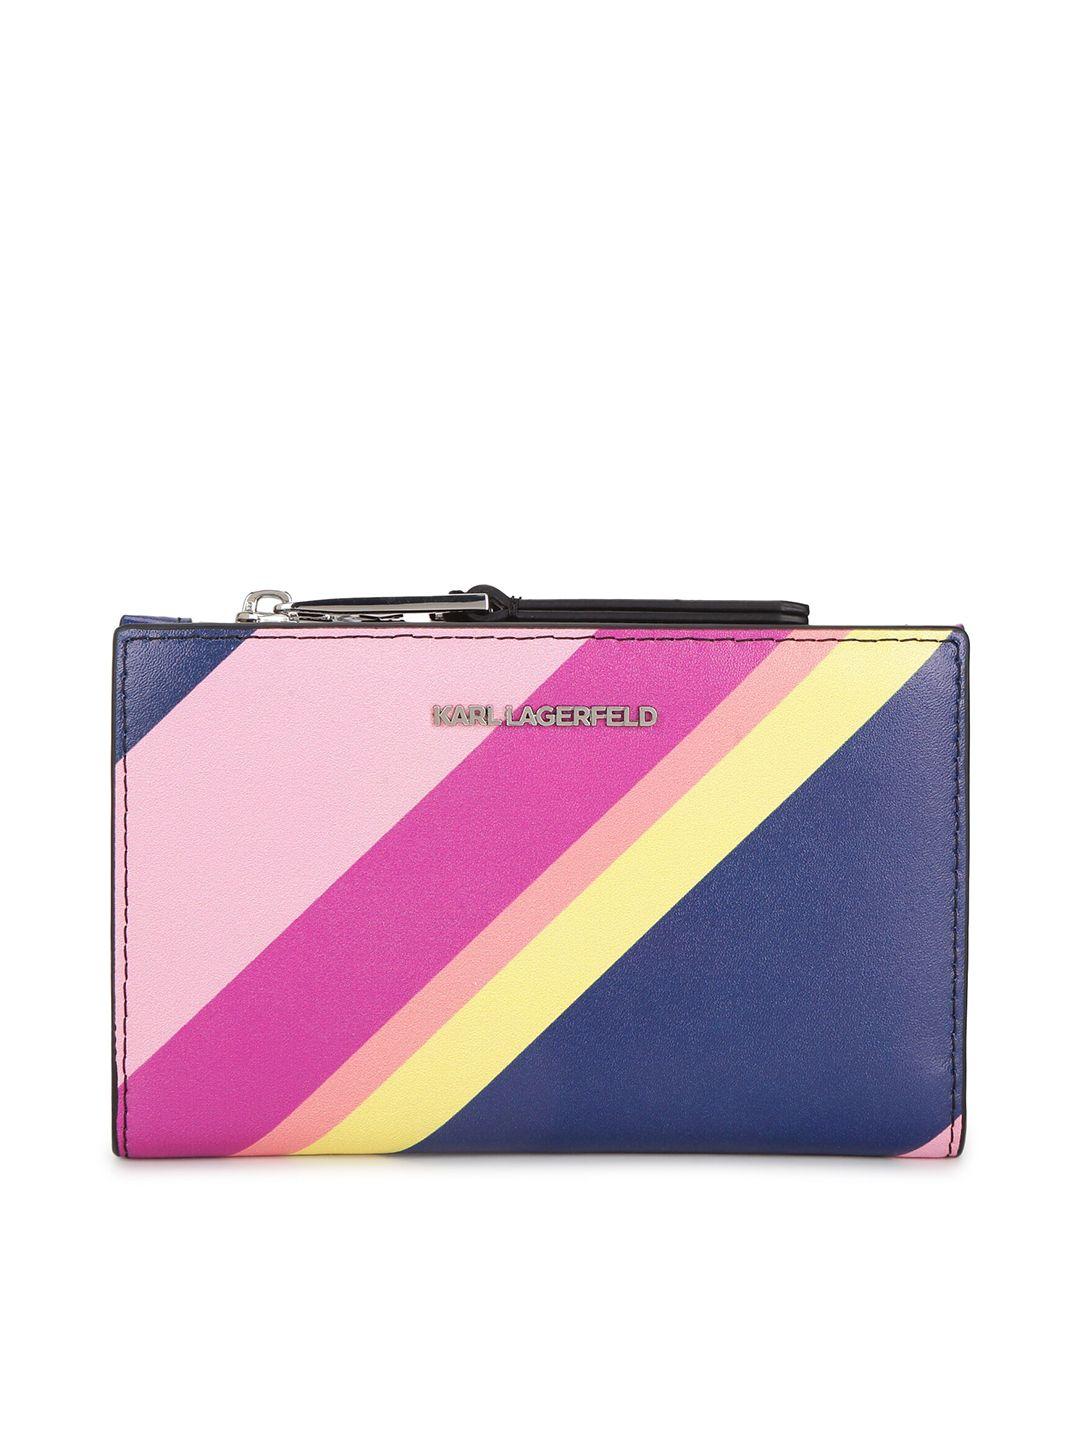 karl lagerfeld women blue & pink printed leather two fold wallet